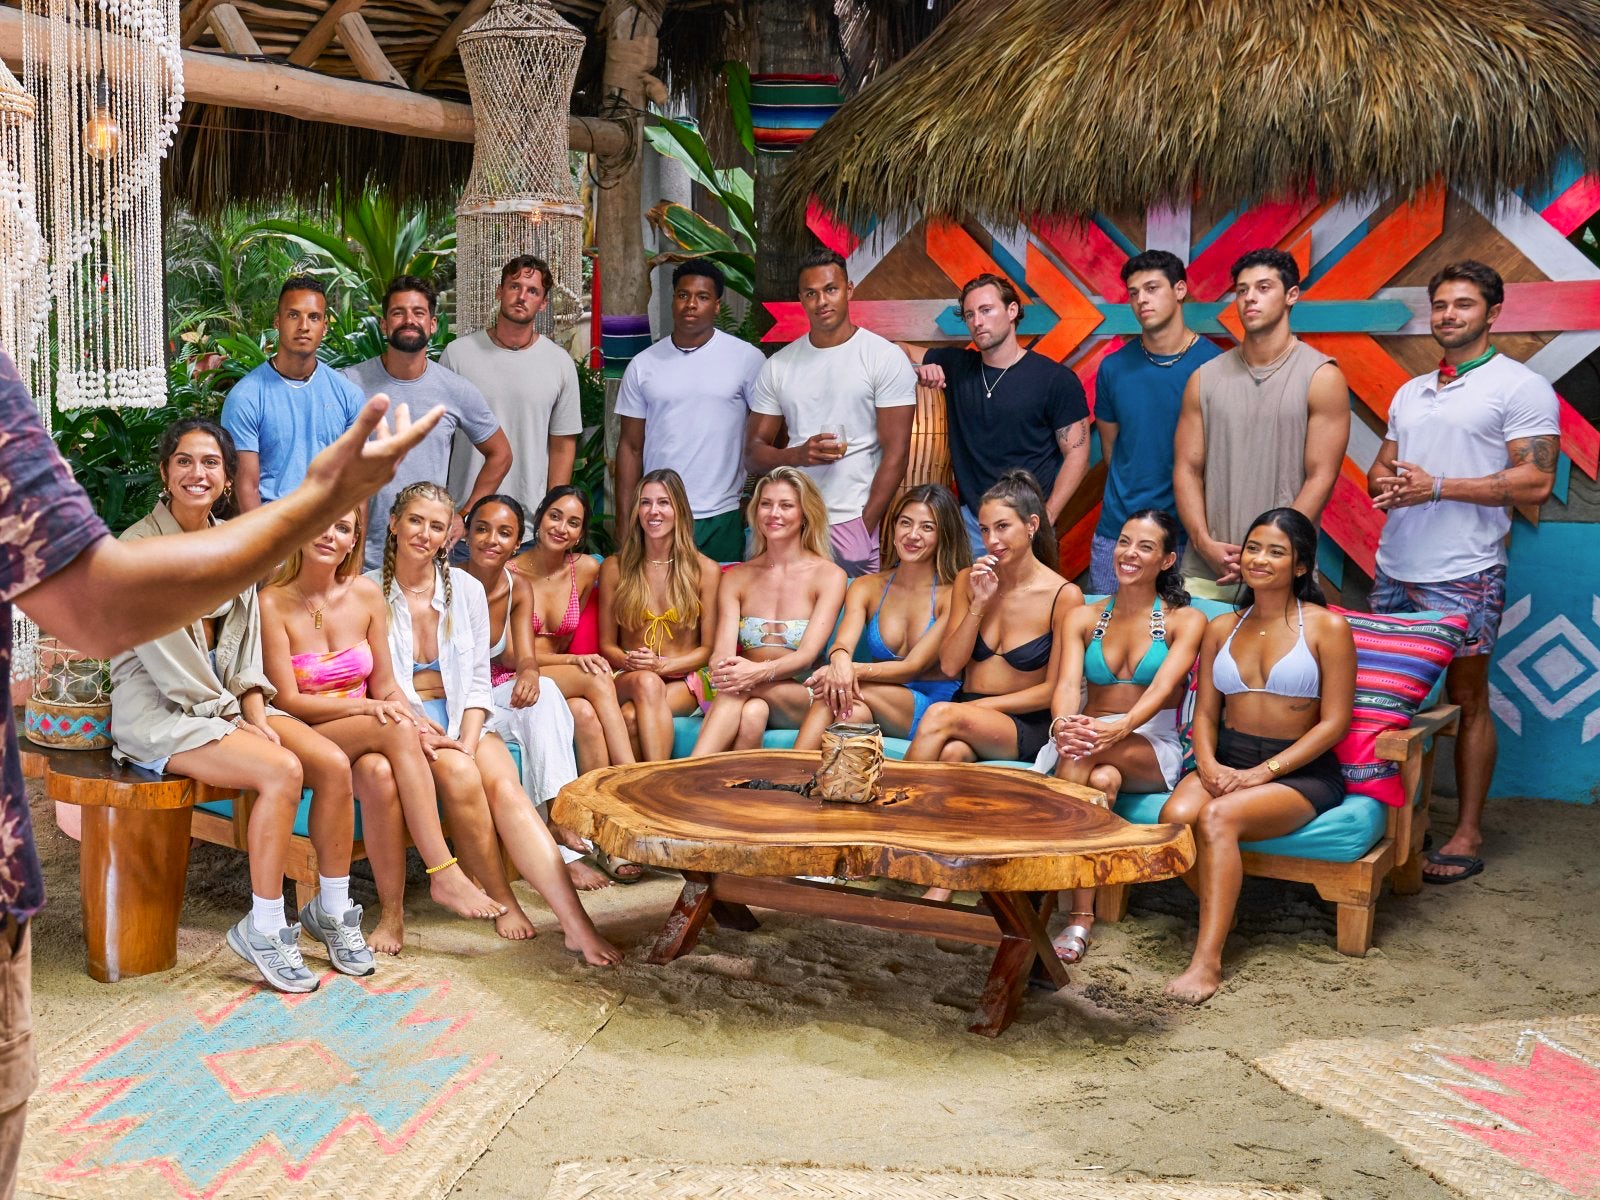 'Bachelor in Paradise' Spoilers: Who gets engaged or stays together on the finale? What happens at the reunion? Which couples are still together now? (SPOILERS)